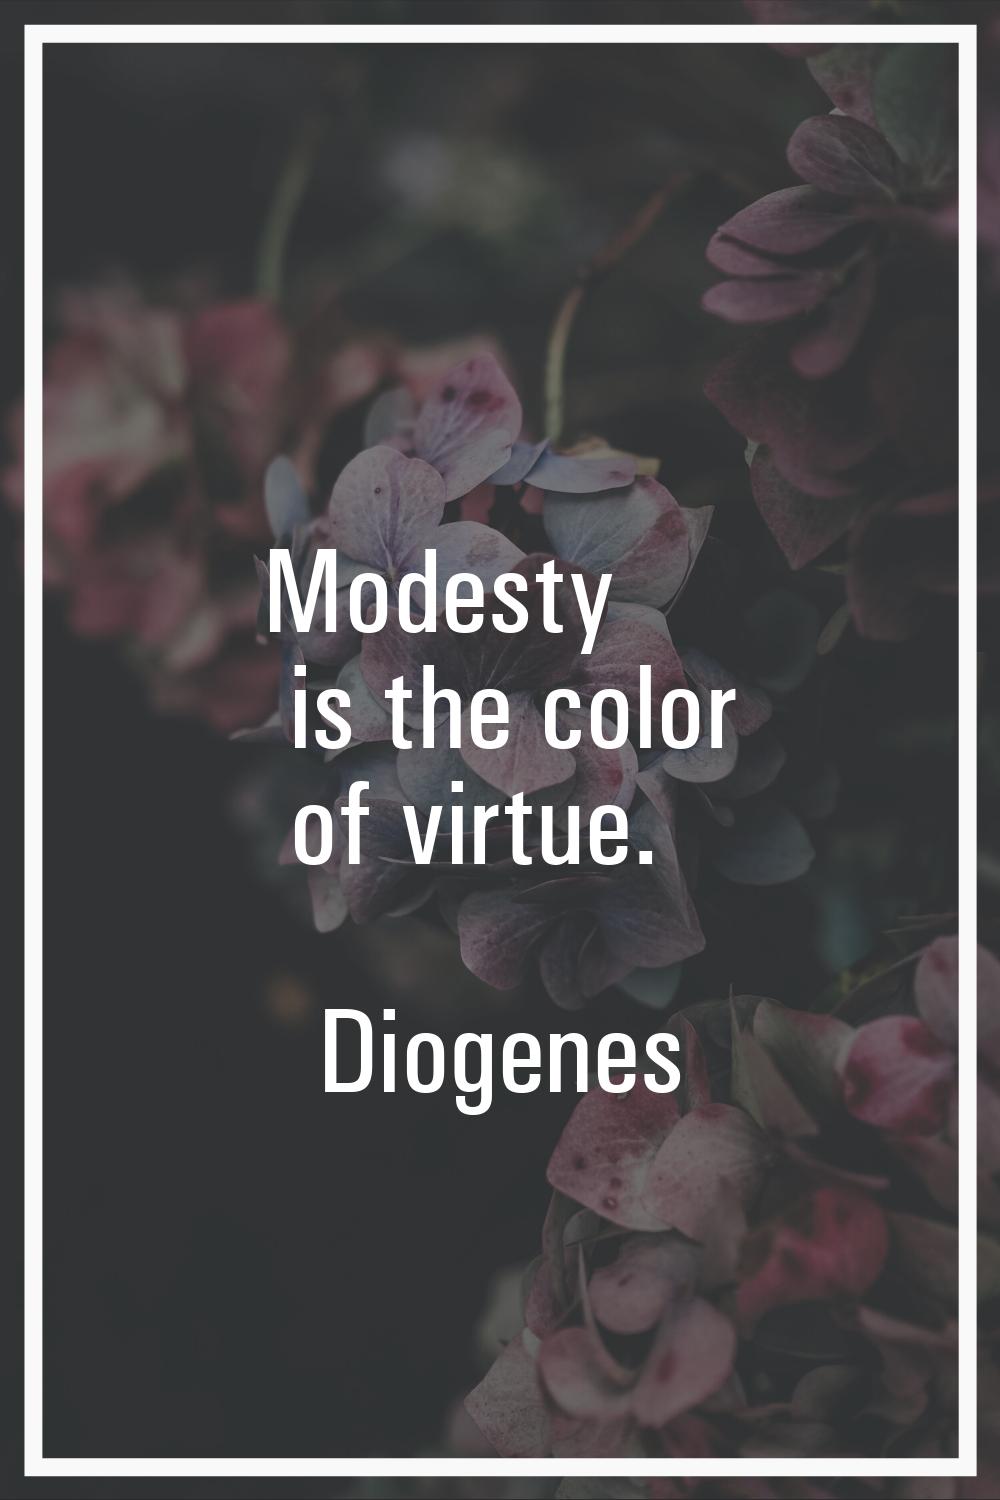 Modesty is the color of virtue.